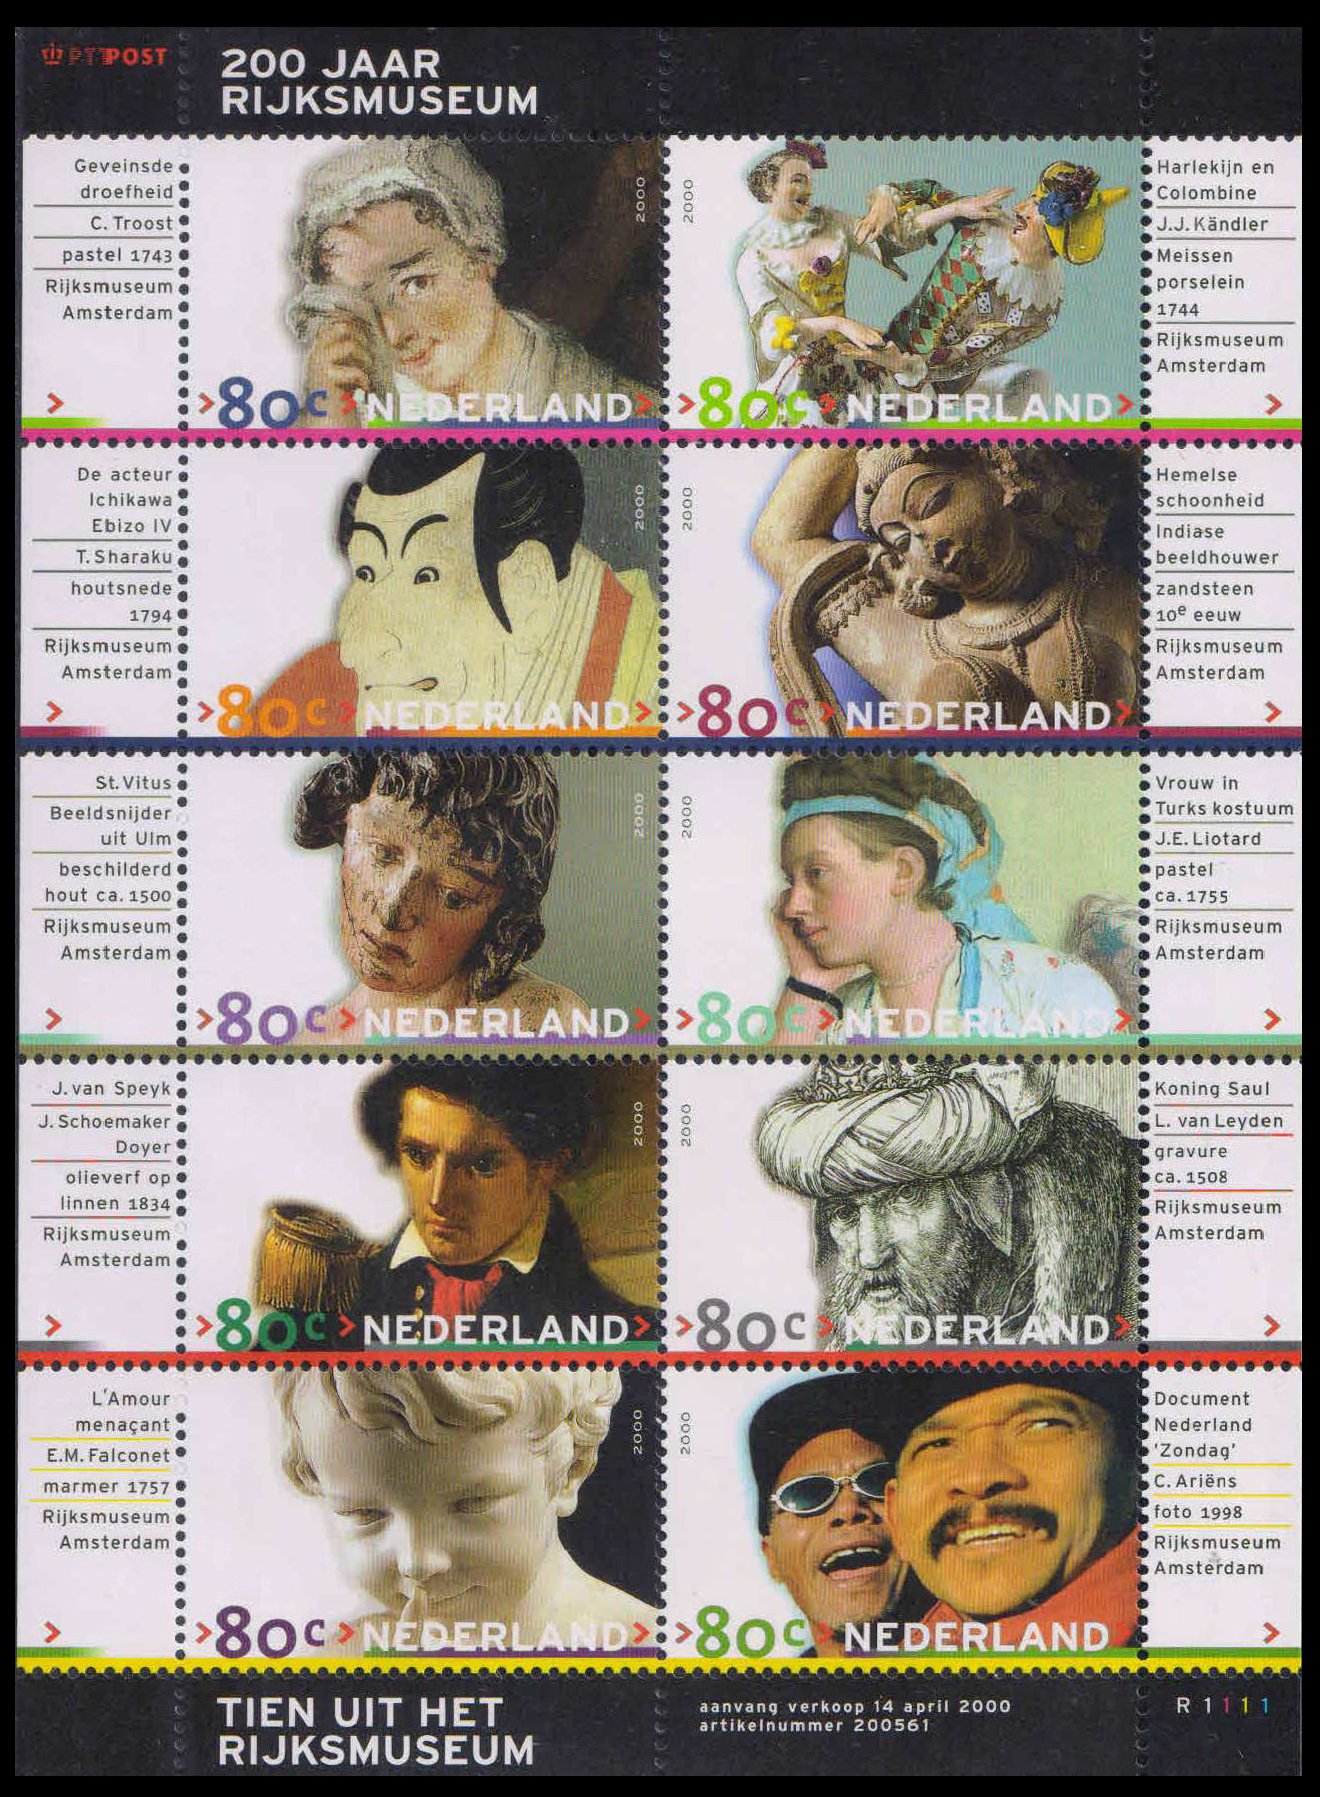 NETHERLAND 2000-Bicentenary of the Rijksmuseum, Amsterdam, Indian Theme Heavenly Beauty (Sandstone Sculpture), Sheetlet of 10, MNH, S.G. 2019-2028-Cat � 22-